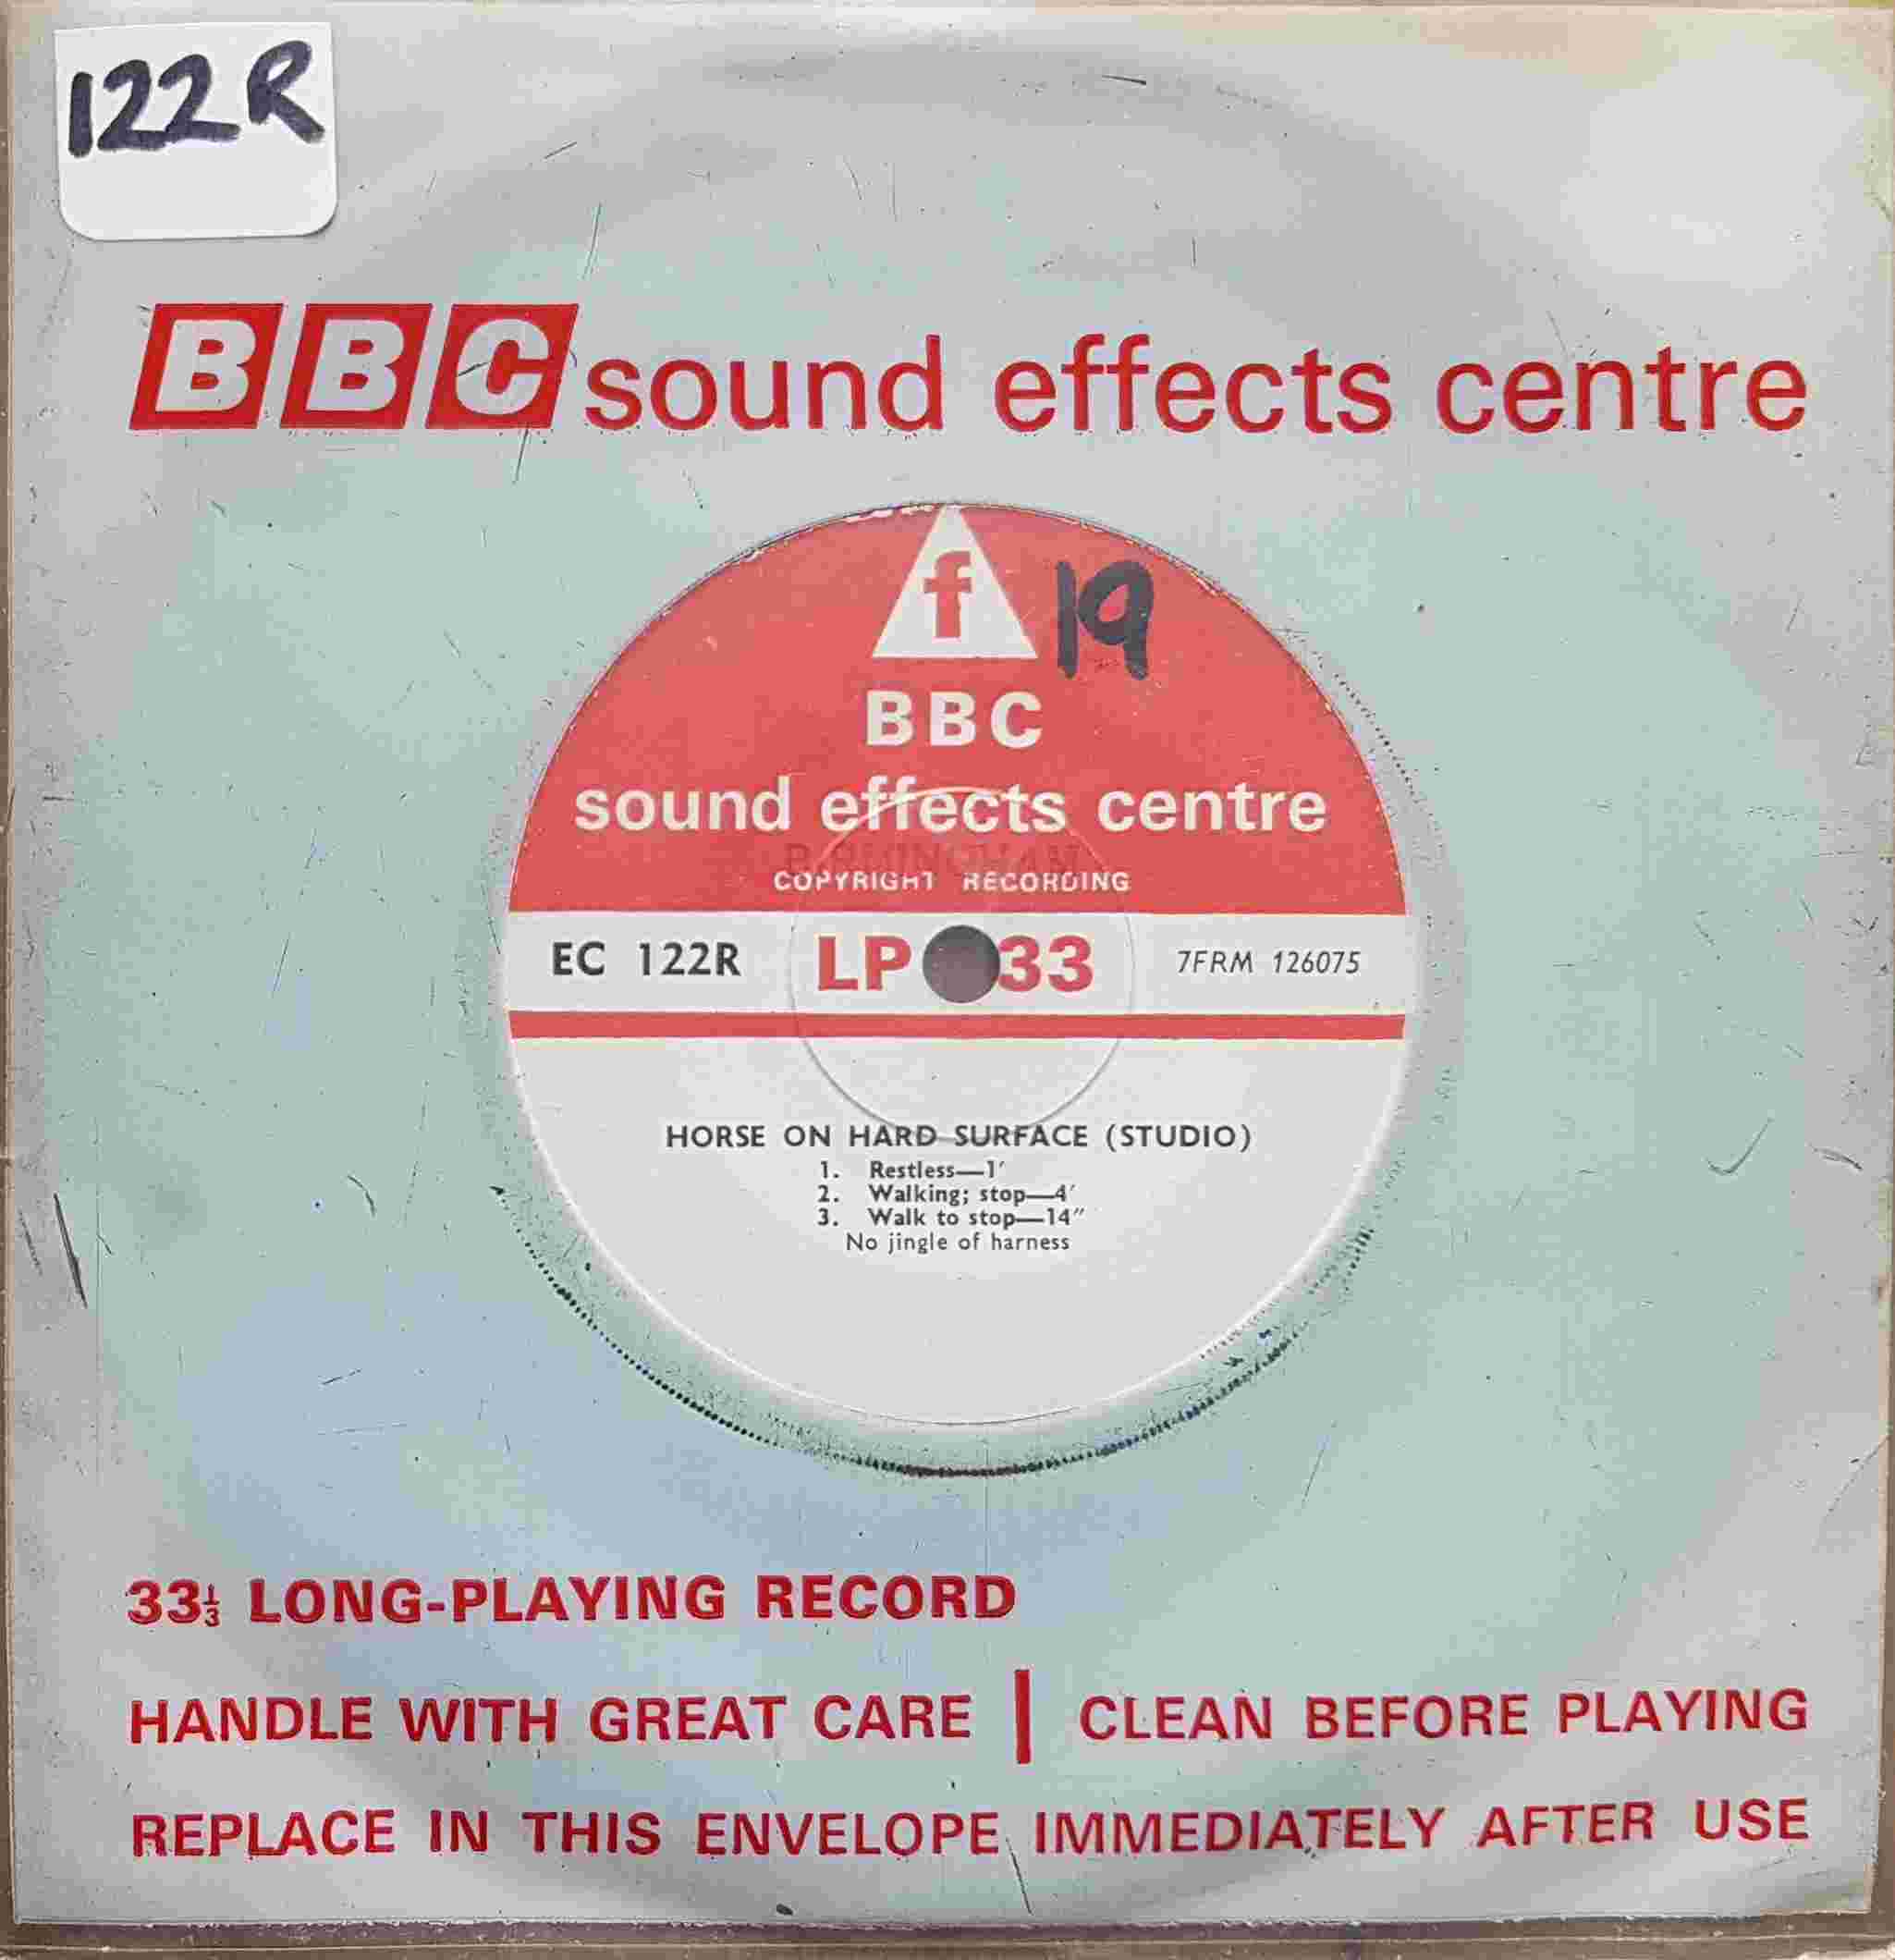 Picture of EC 122R Horse on hard surface (Studio) - No jingle or harness by artist Not registered from the BBC singles - Records and Tapes library